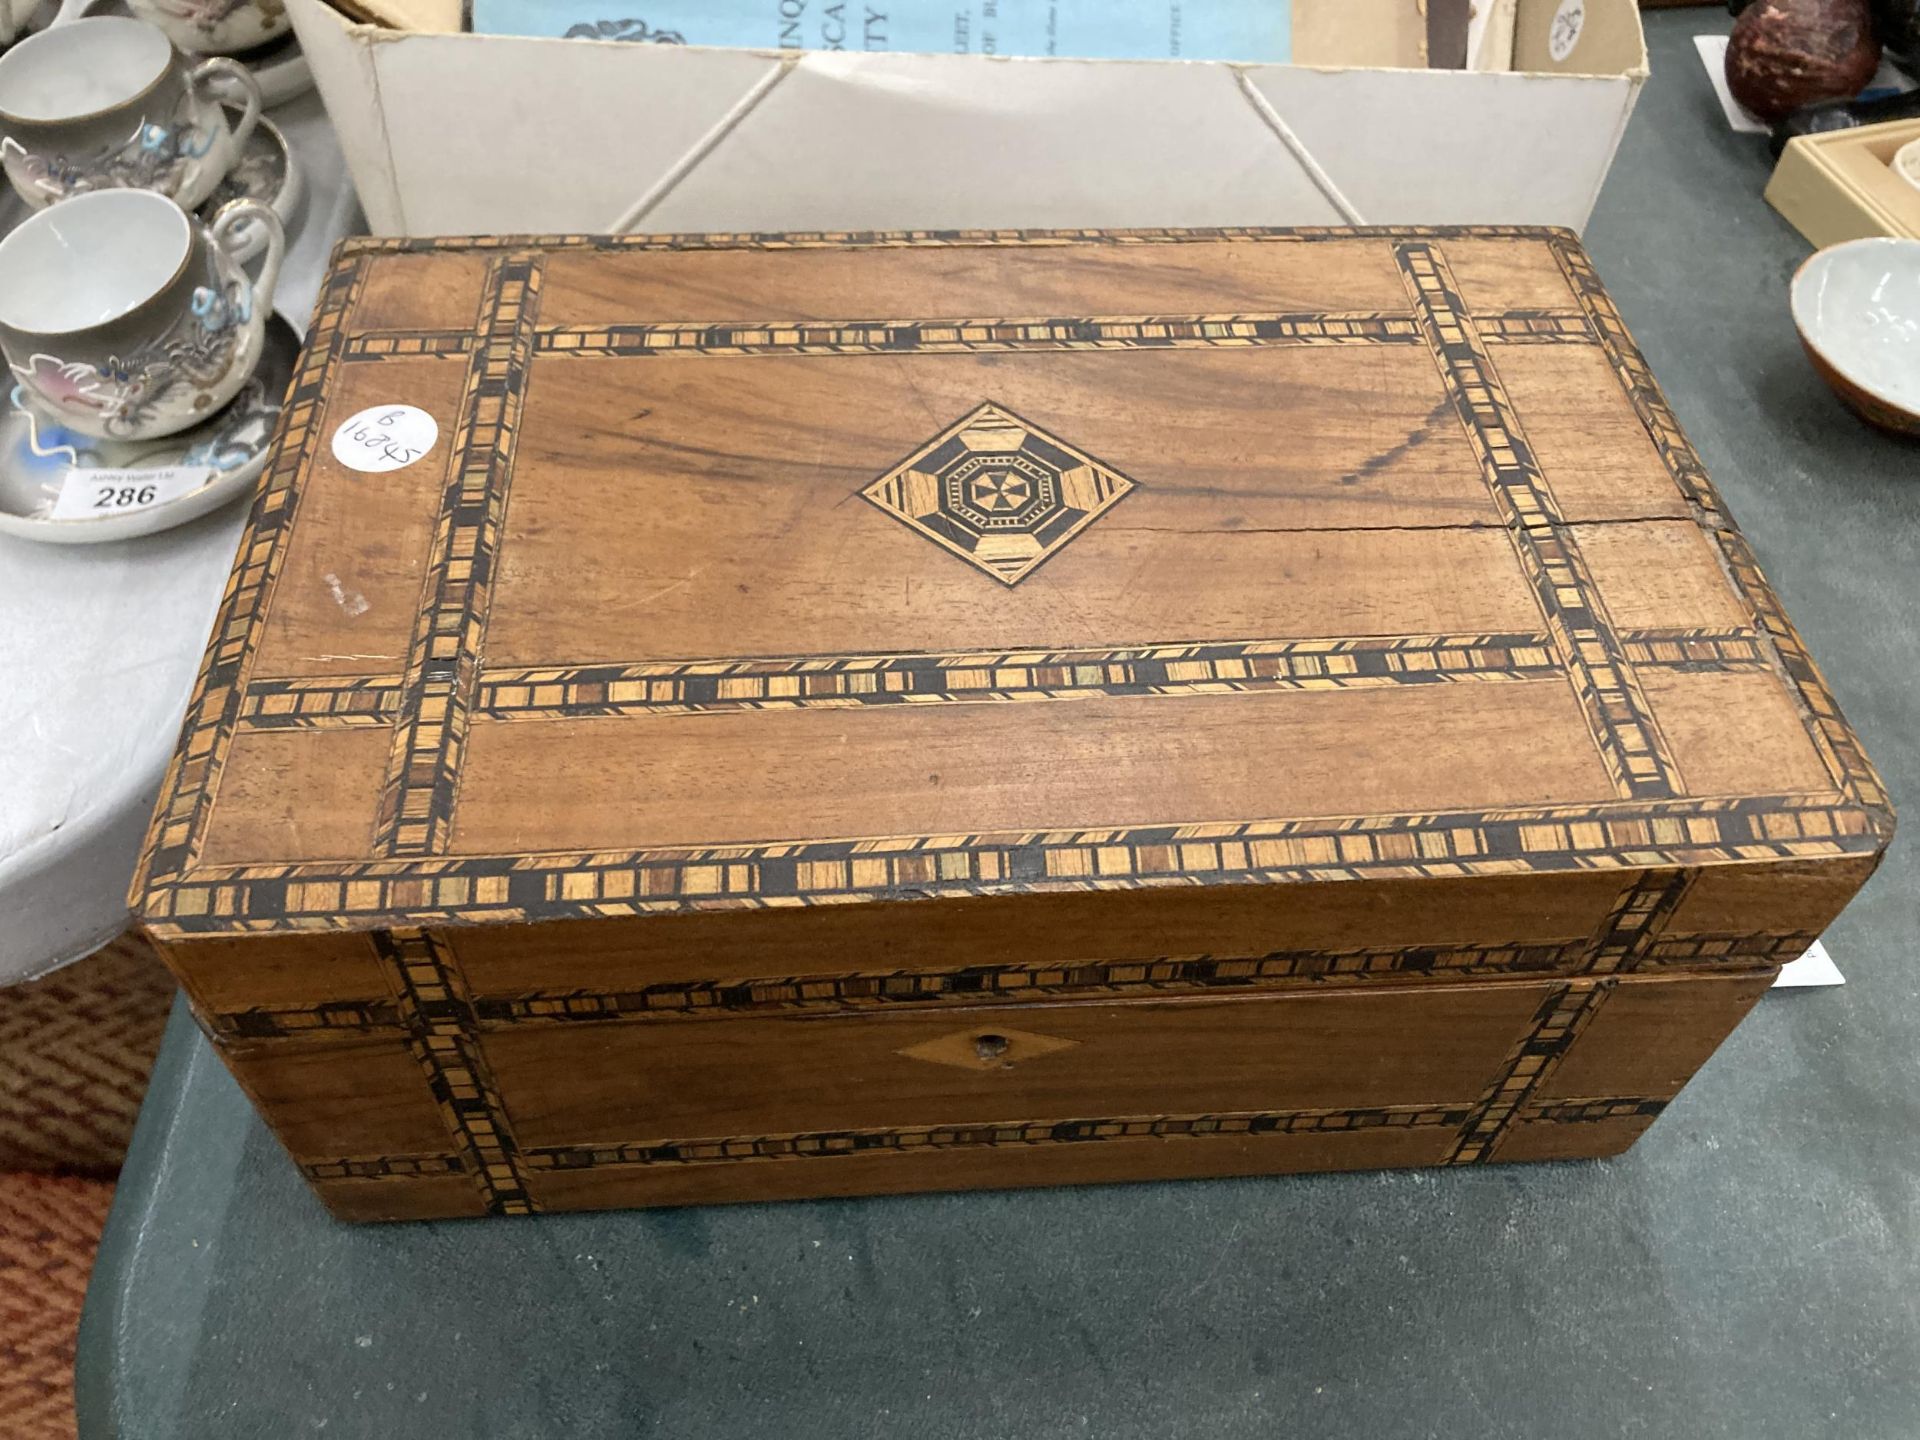 A VINTAGE INLAID BOX CONTAINING VINTAGE ITEMS, CORKSCREWS ETC TOGETHER WITH LOOSE PRINTS AND - Image 3 of 6